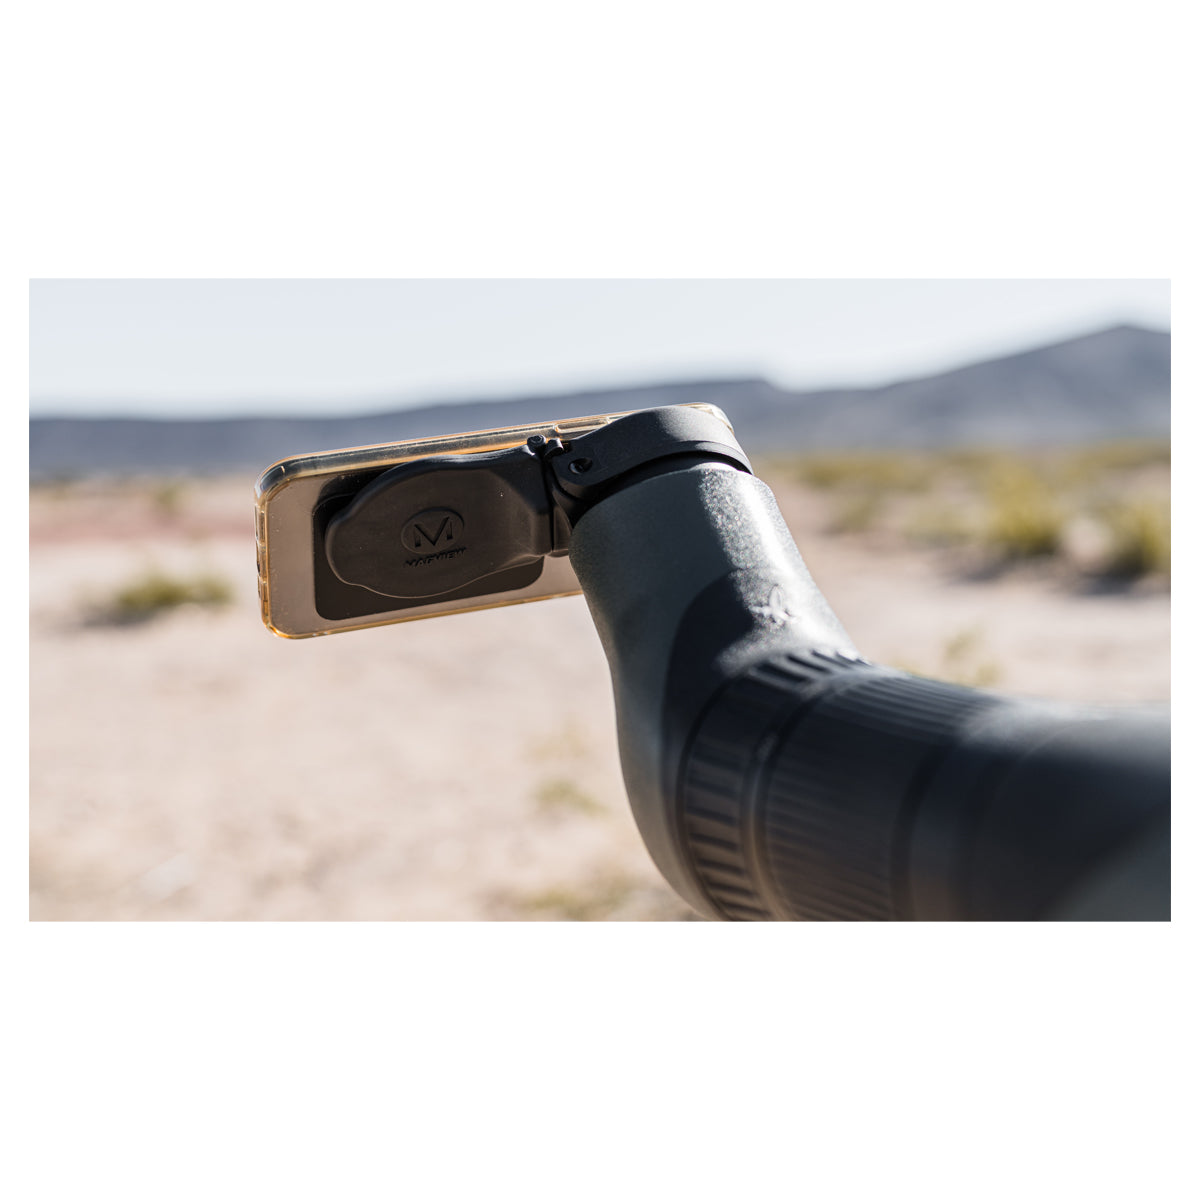 Magview S1 Spotting Scope System in  by GOHUNT | Magview - GOHUNT Shop